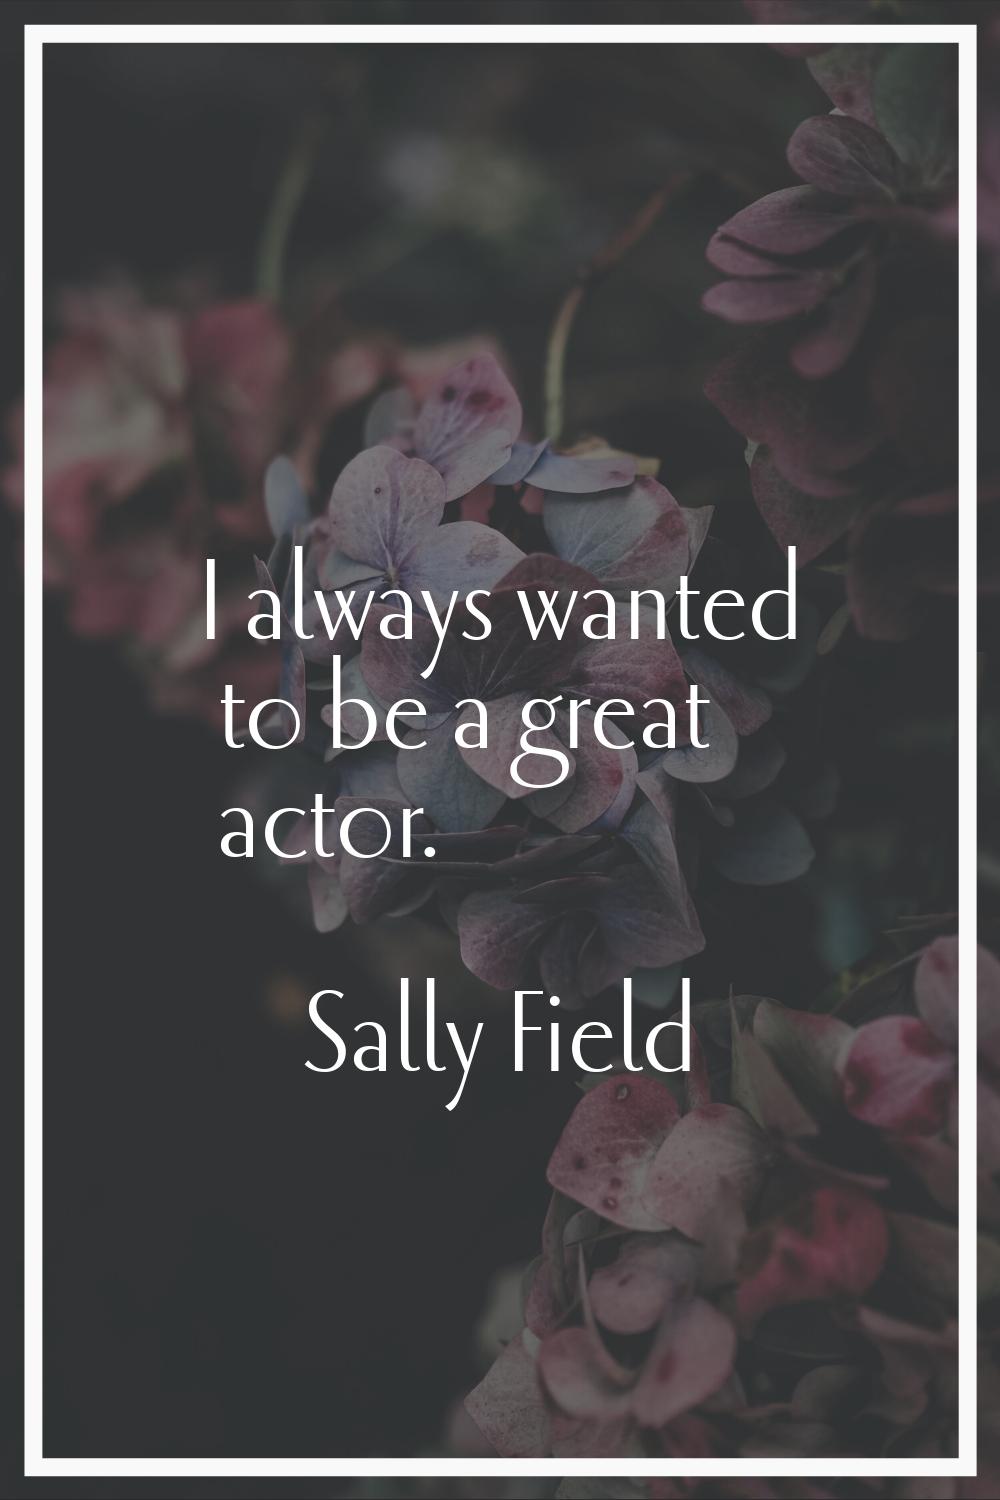 I always wanted to be a great actor.